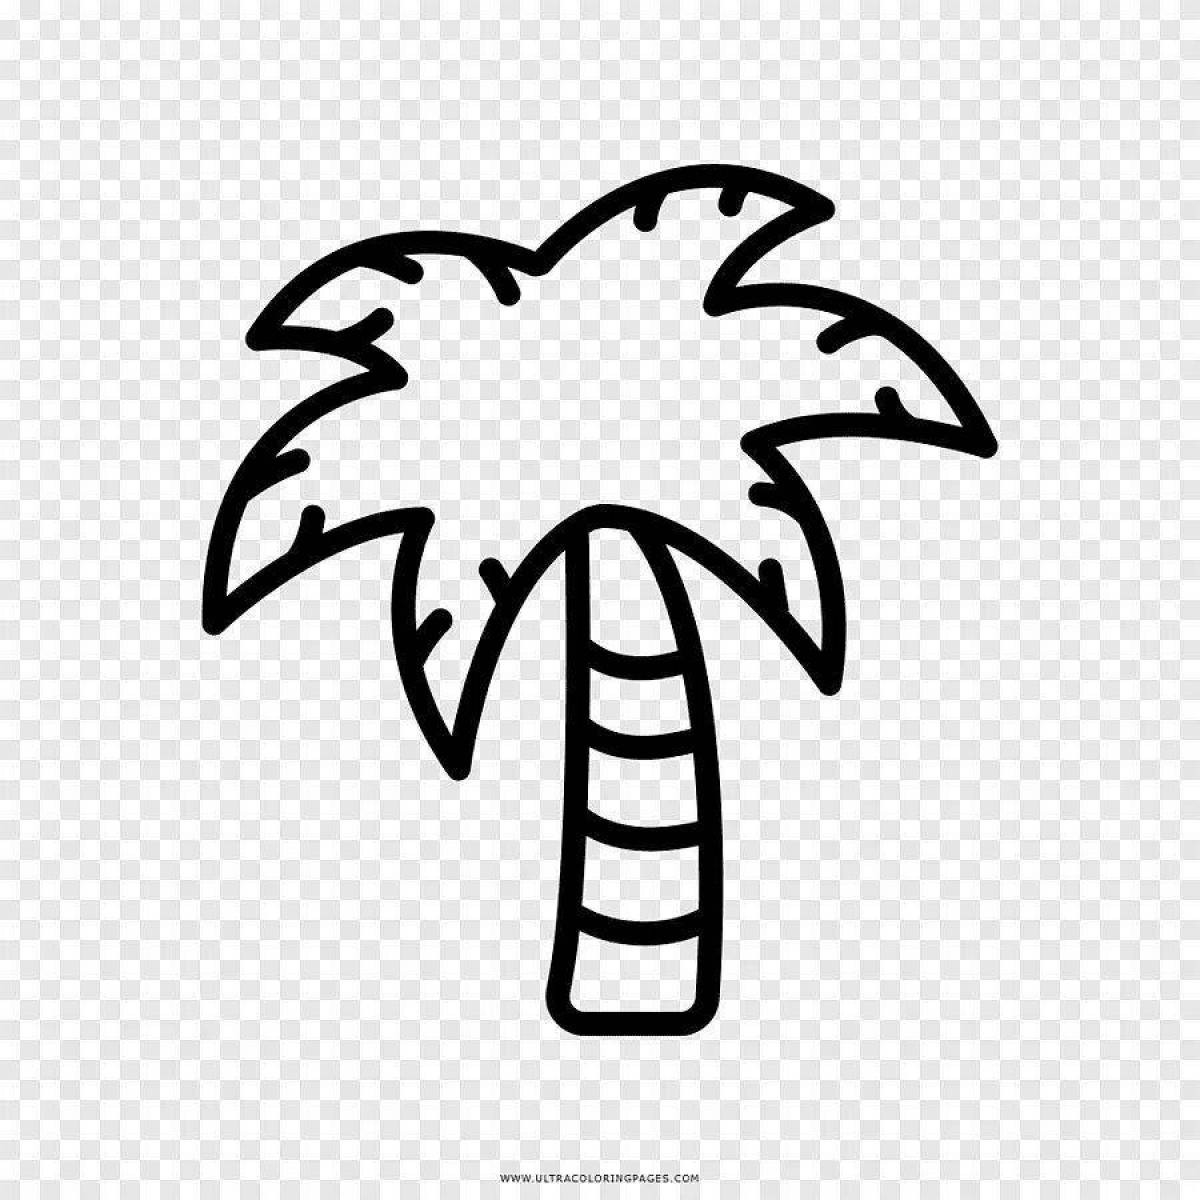 Cool palm tree coloring page for kids